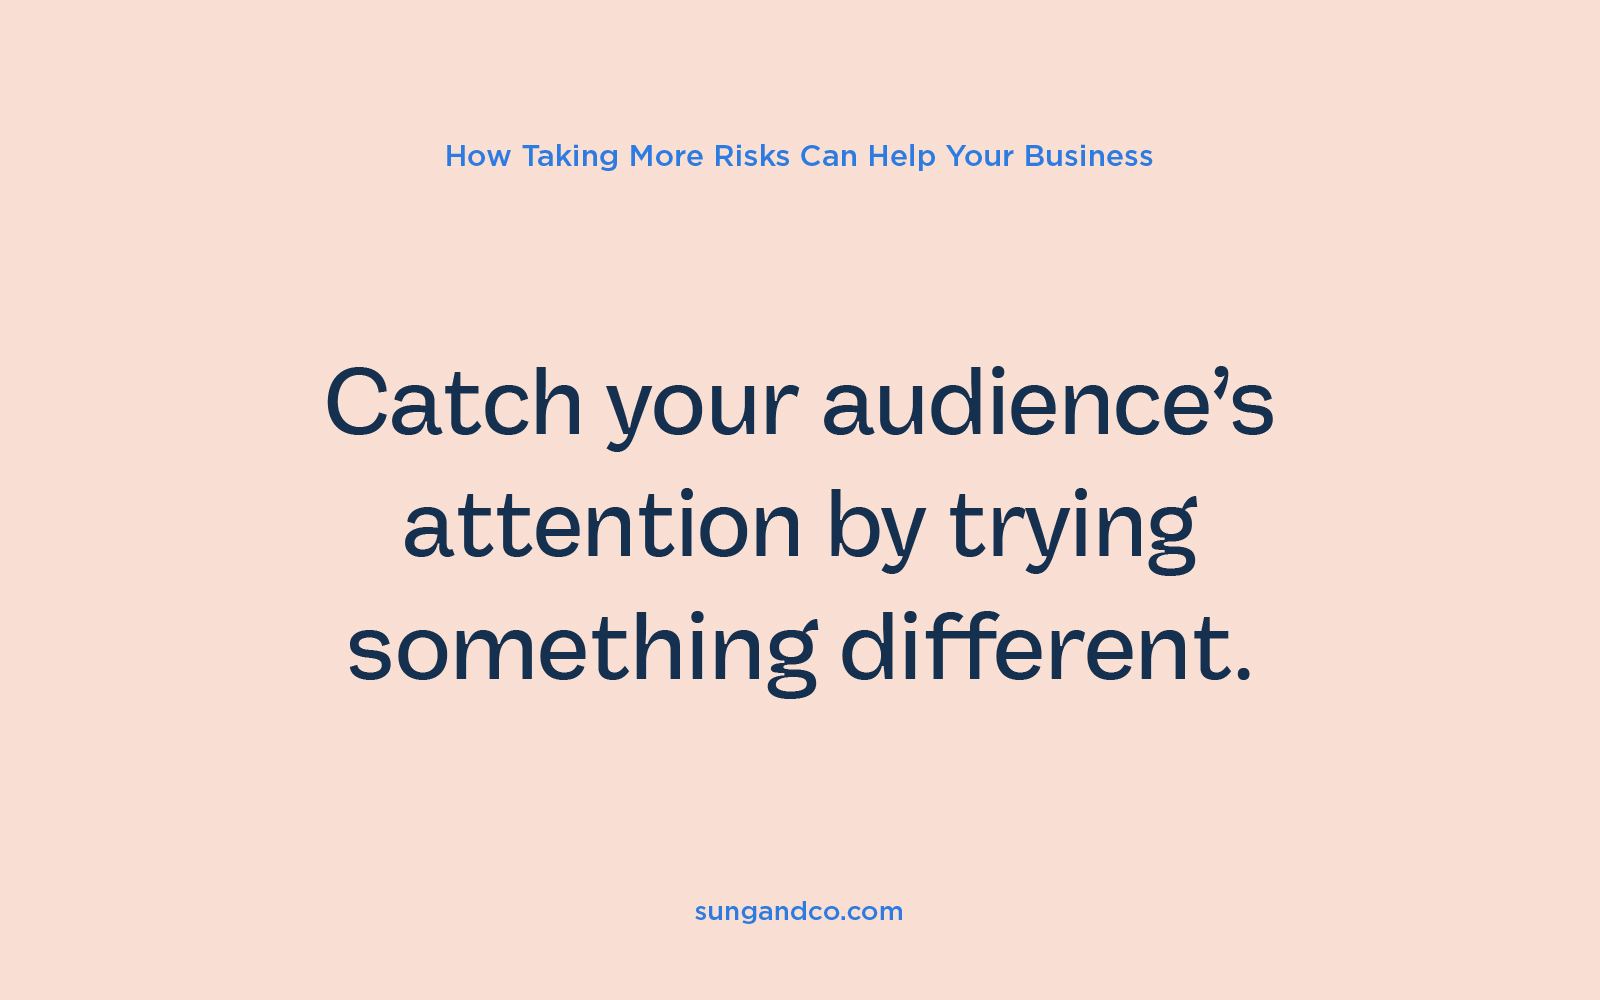 Catch your audience's attention by trying something different – text graphic